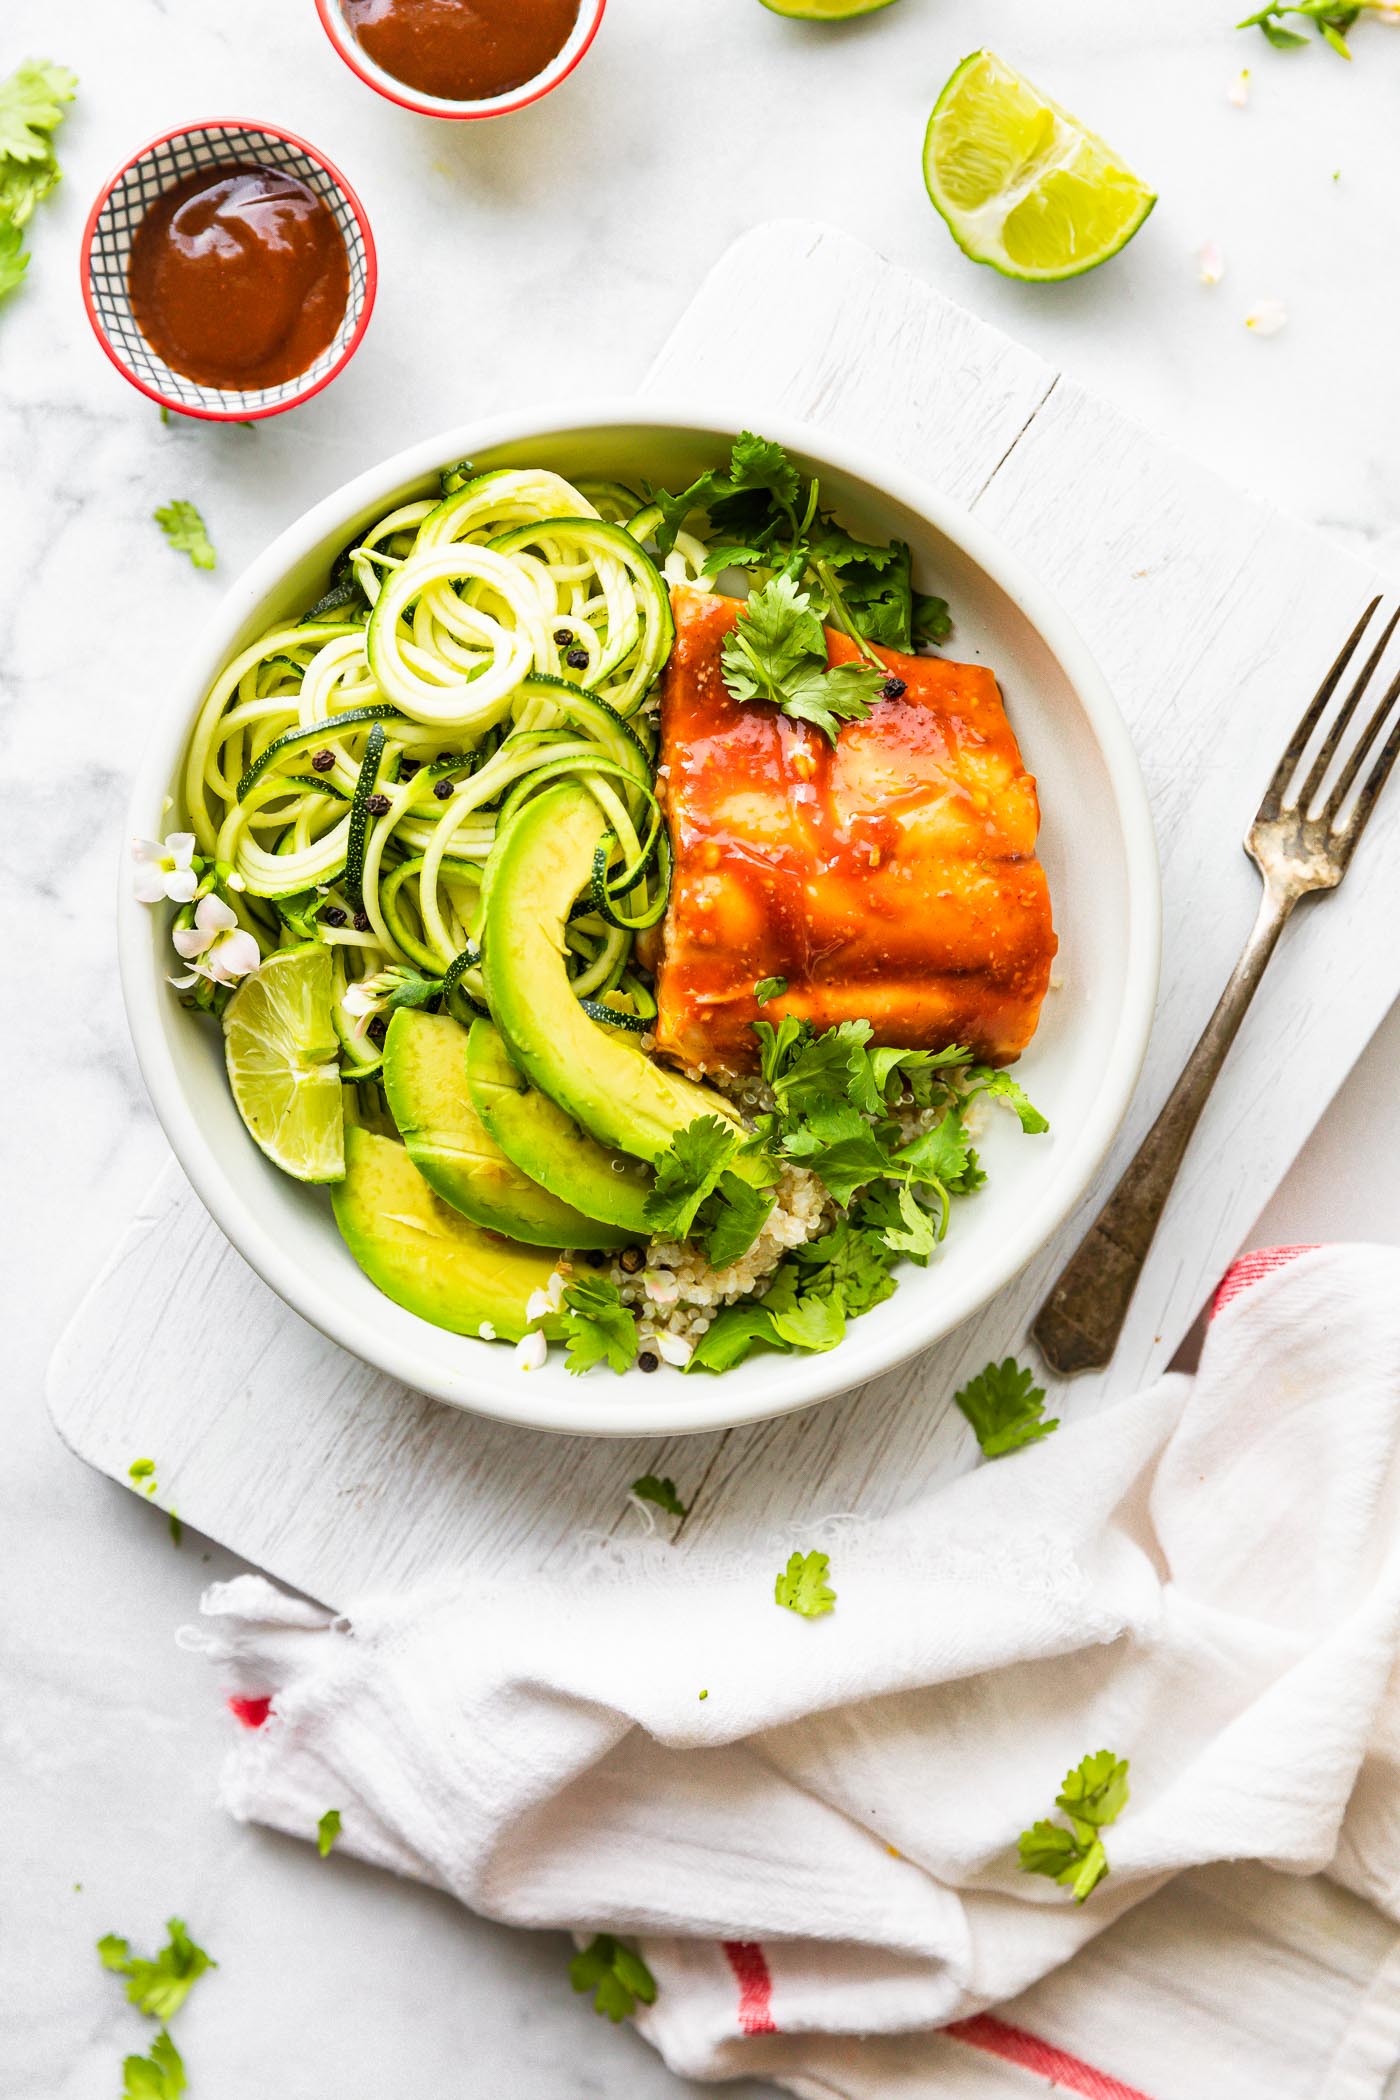 BBQ baked salmon and avocado and zucchini in shallow white bowl on white cutting board.